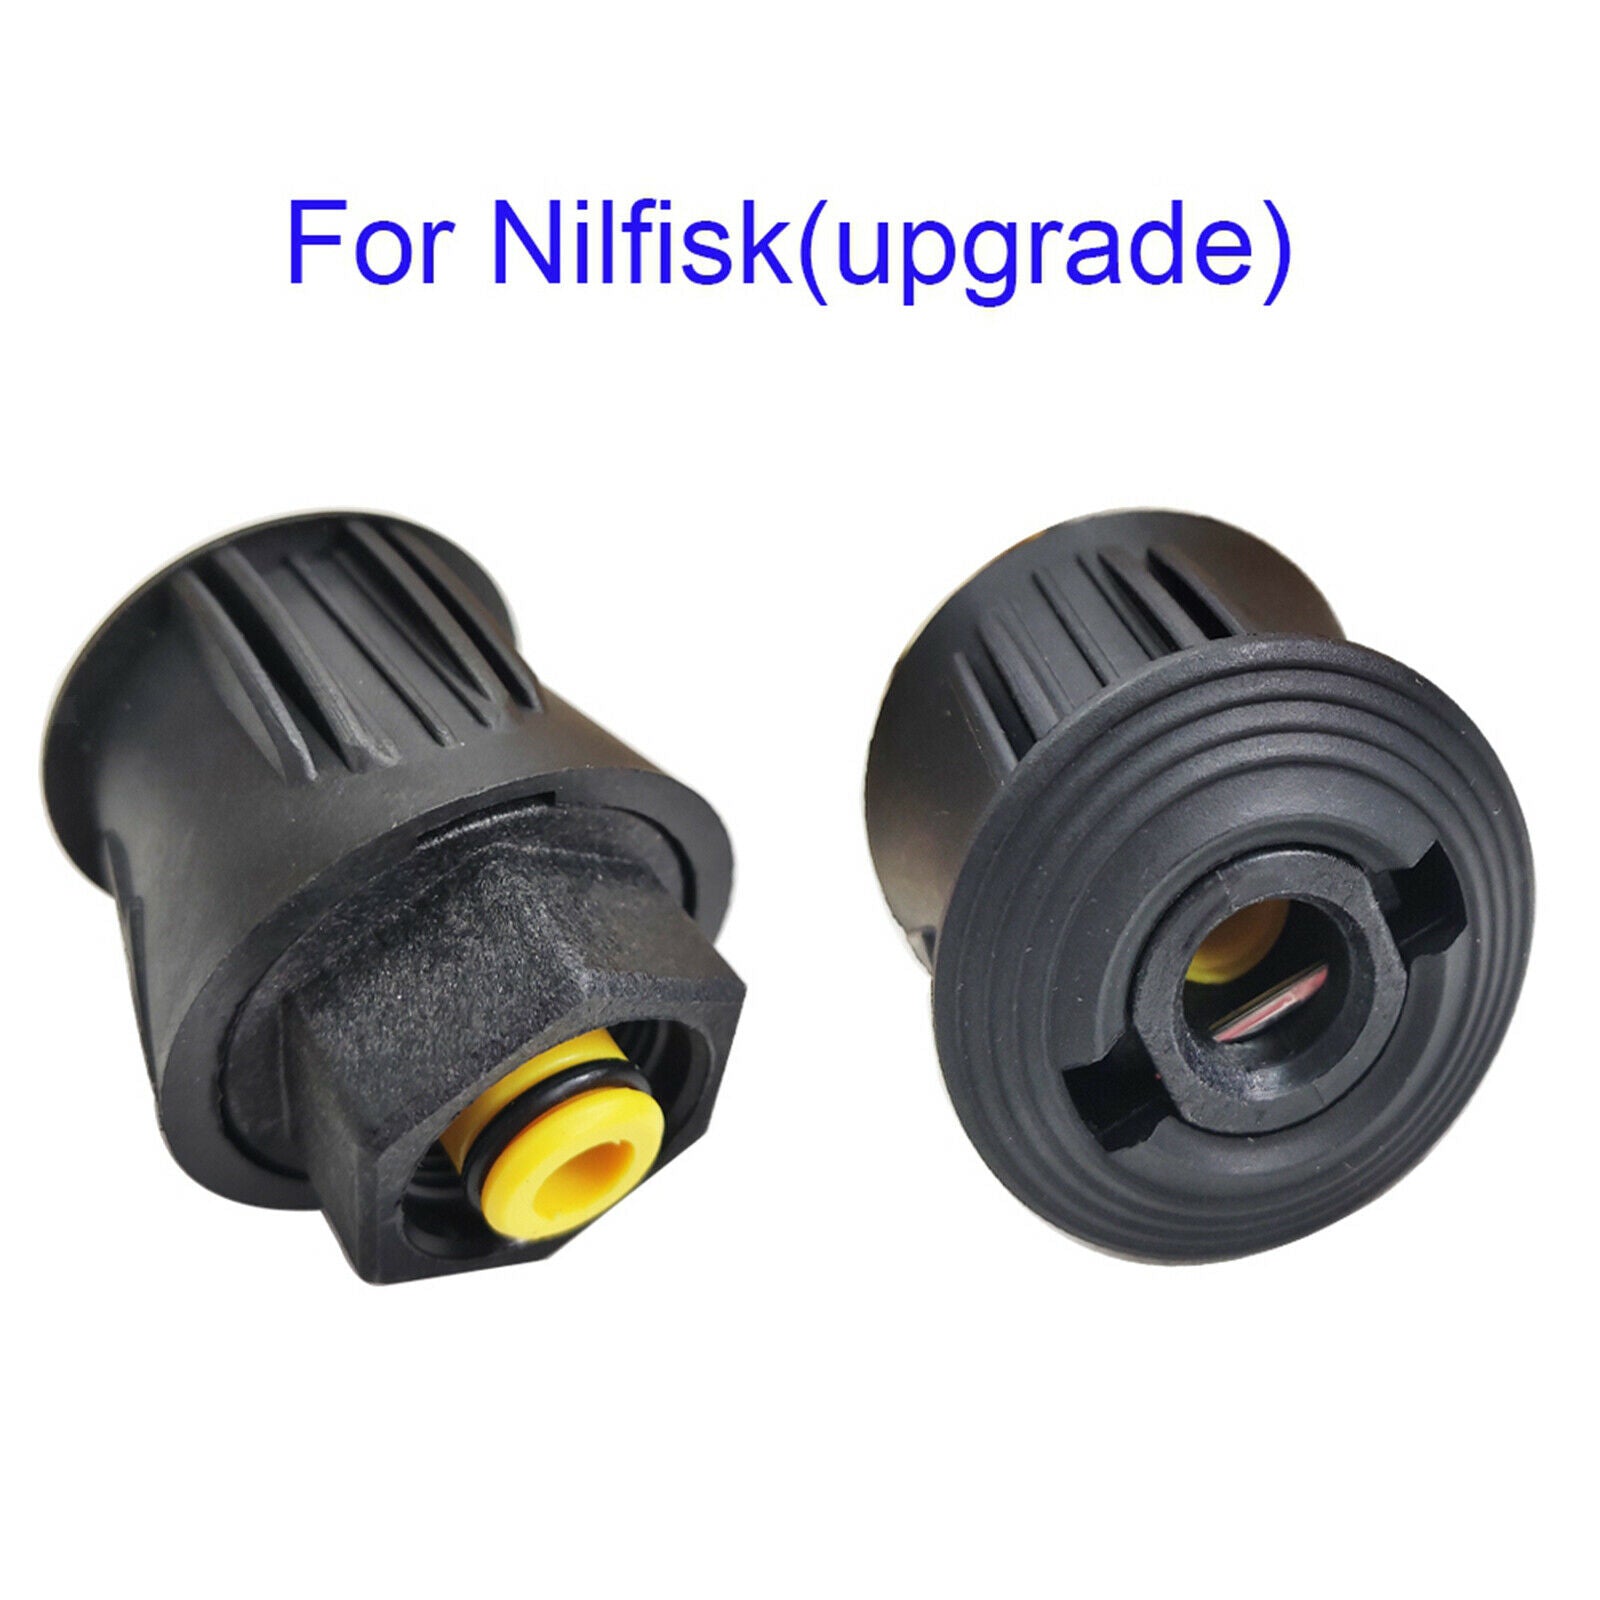 Washer Hose Adapter M22 Converter Power Washer Outlet for Nilfisk Accessory